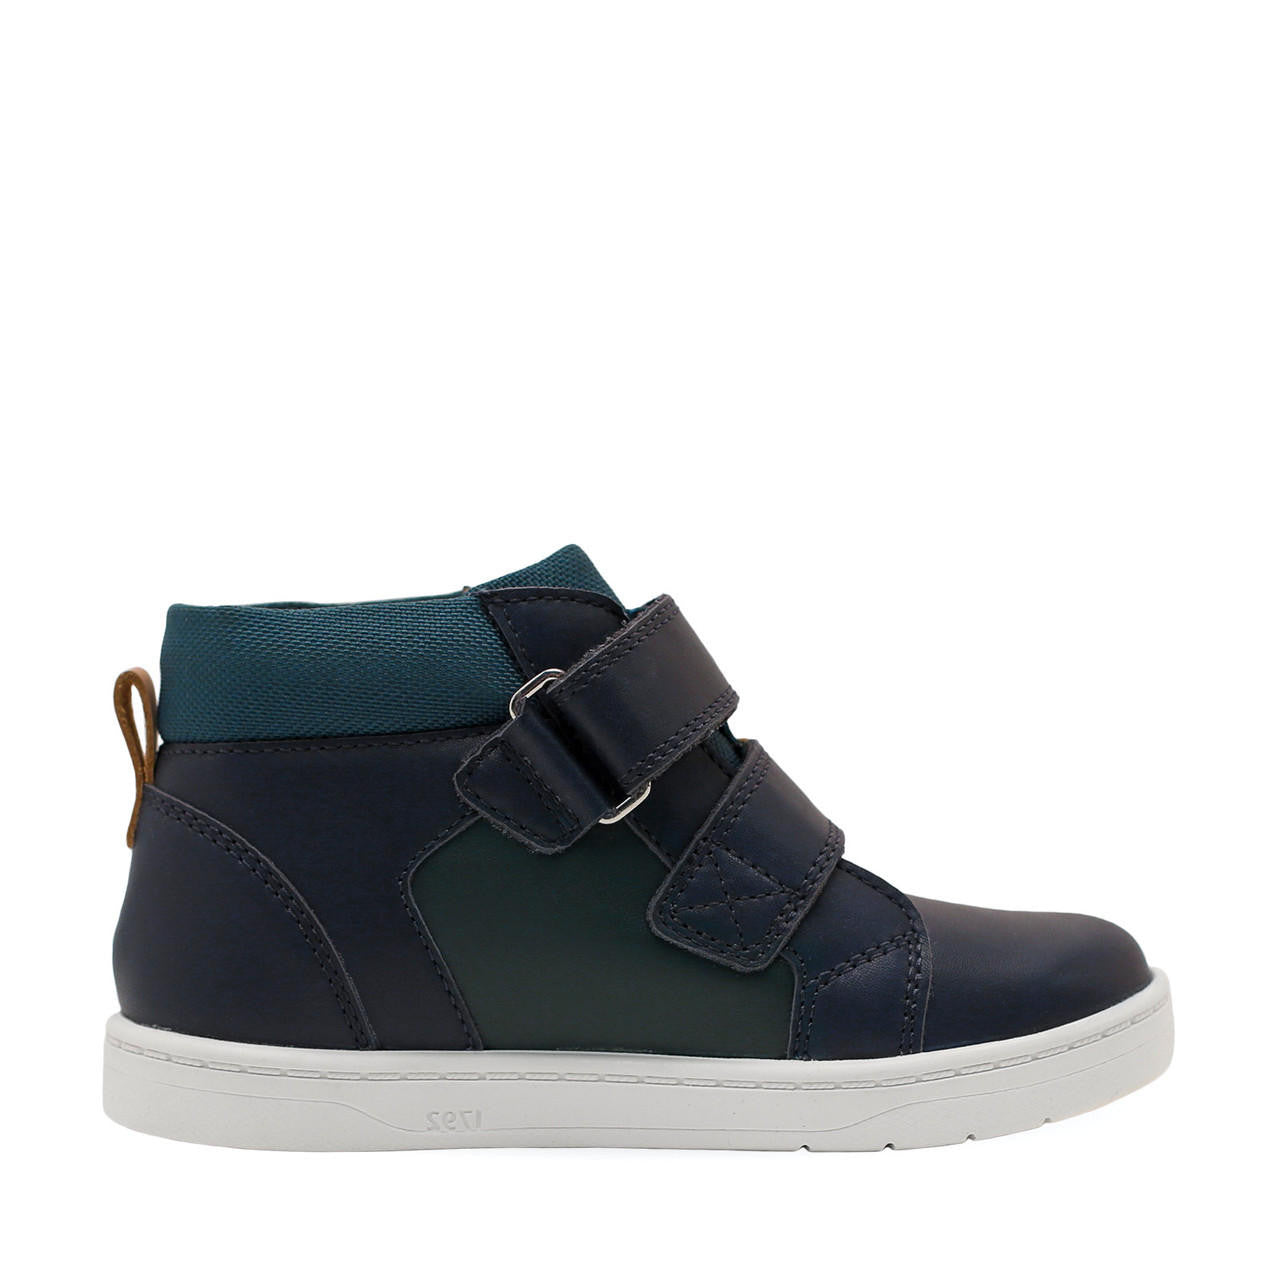 Discover Navy and Dark Green Leather Boot